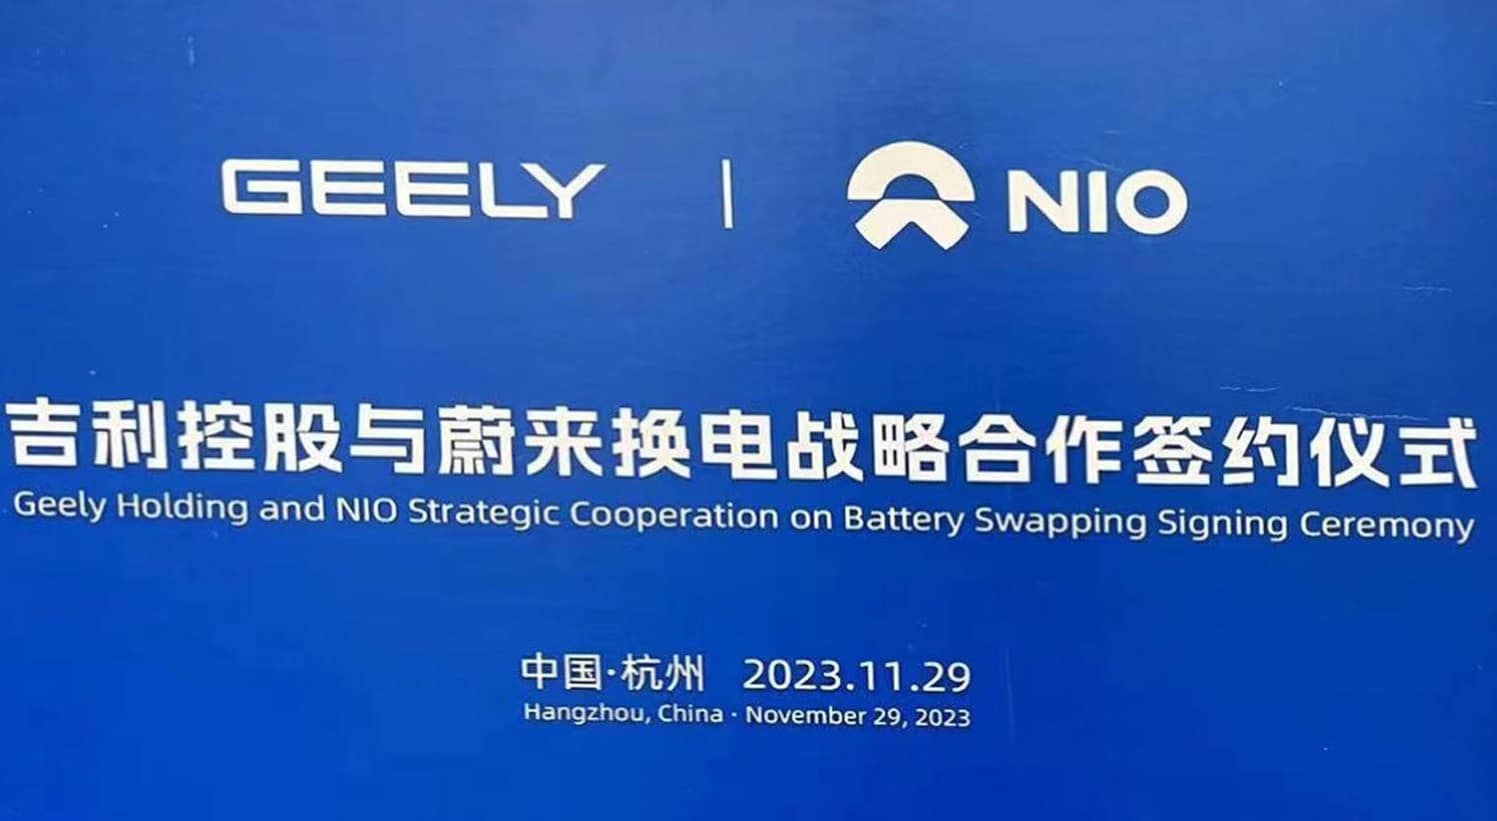 Geely Holding and Nio to sign cooperation on battery swapping business